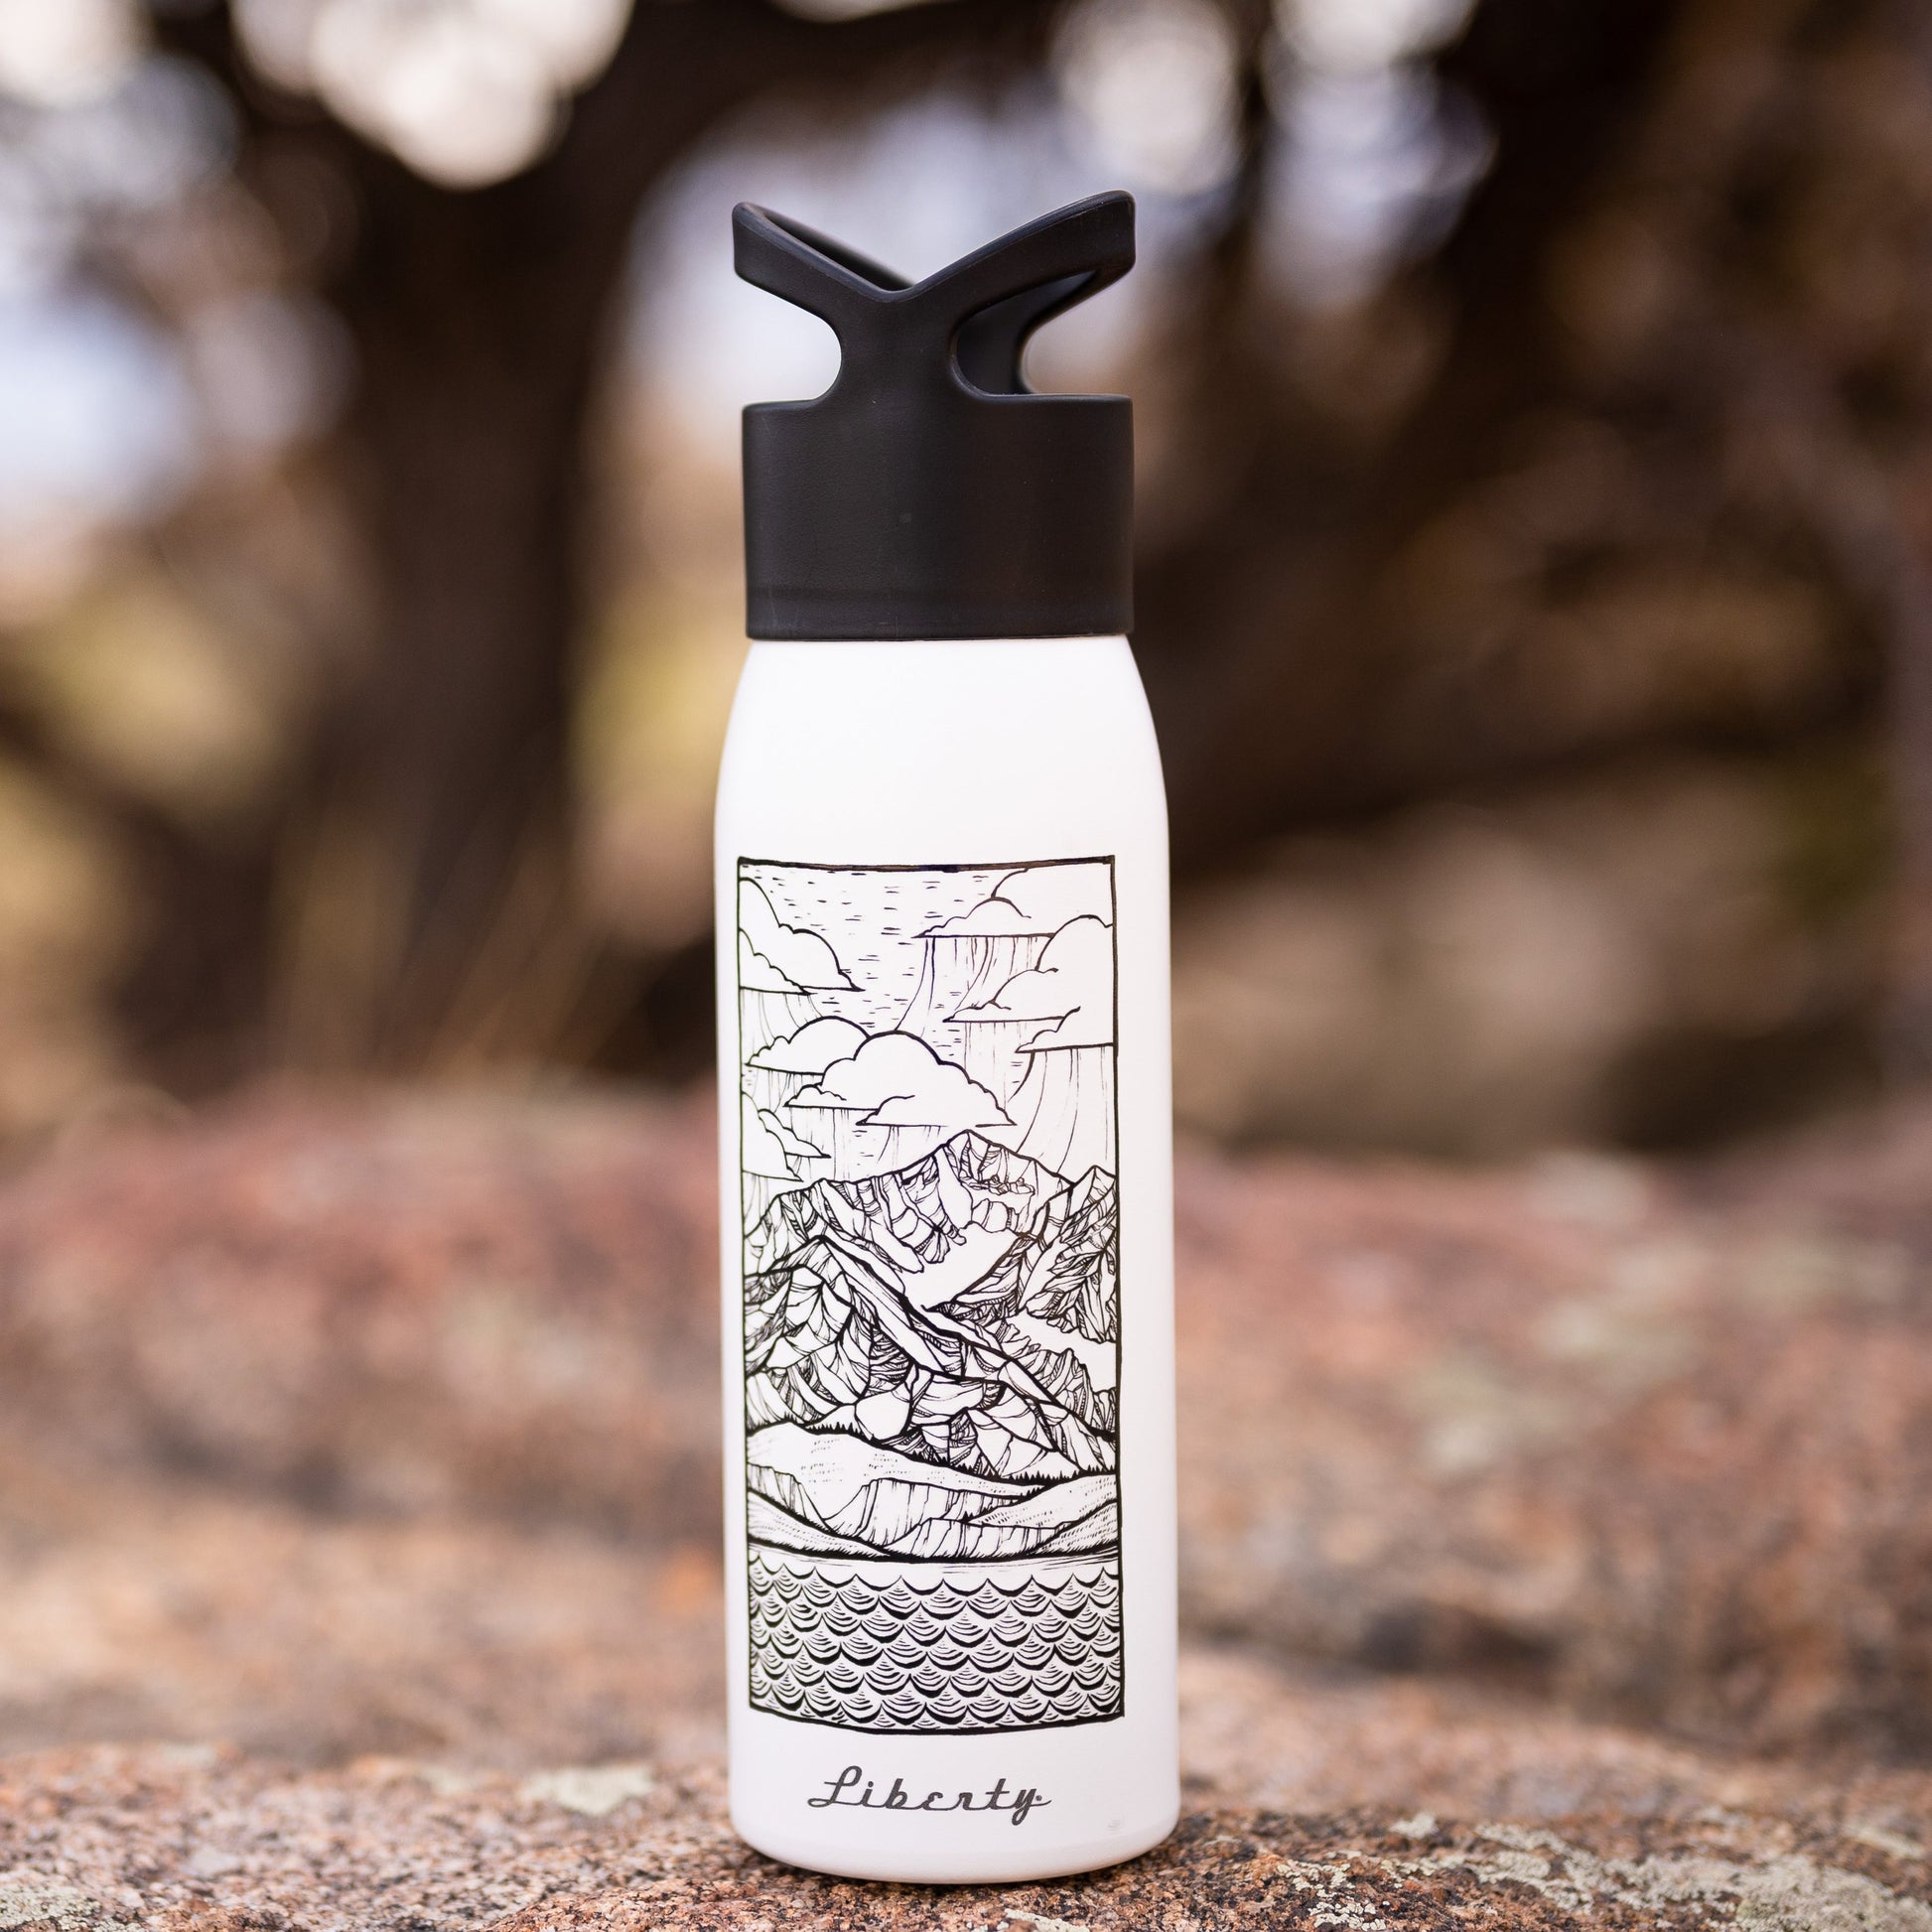  Be part of the solution  Keep single use plastic bottles out of the ecosystem.     Custom art work by local Salida artist Brink Messick  Made in the USA     - 24 Ounce  - Made of 100% Recycled American Aluminum  - Single wall aluminum ensures a super lightweight bottle  - BPA & BPS Free